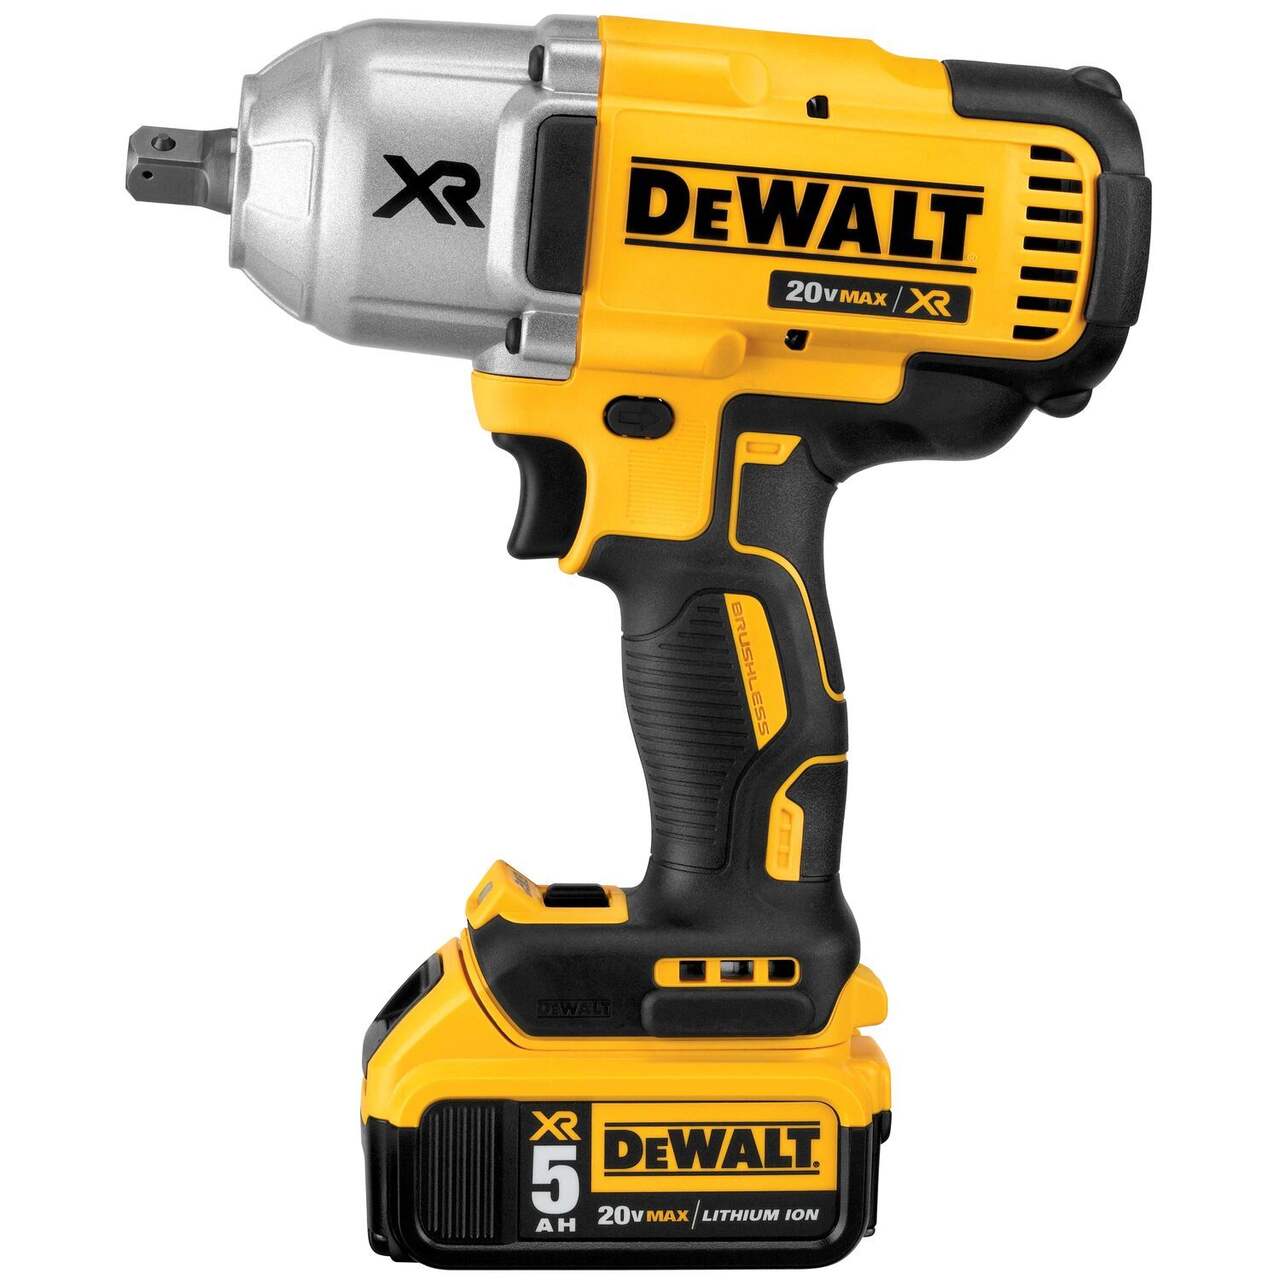 DEWALT DCF899P2 20V MAX XR 3-Speed Brushless High Torque Impact Wrench with  Detent Pin Anvil, 1/2-in